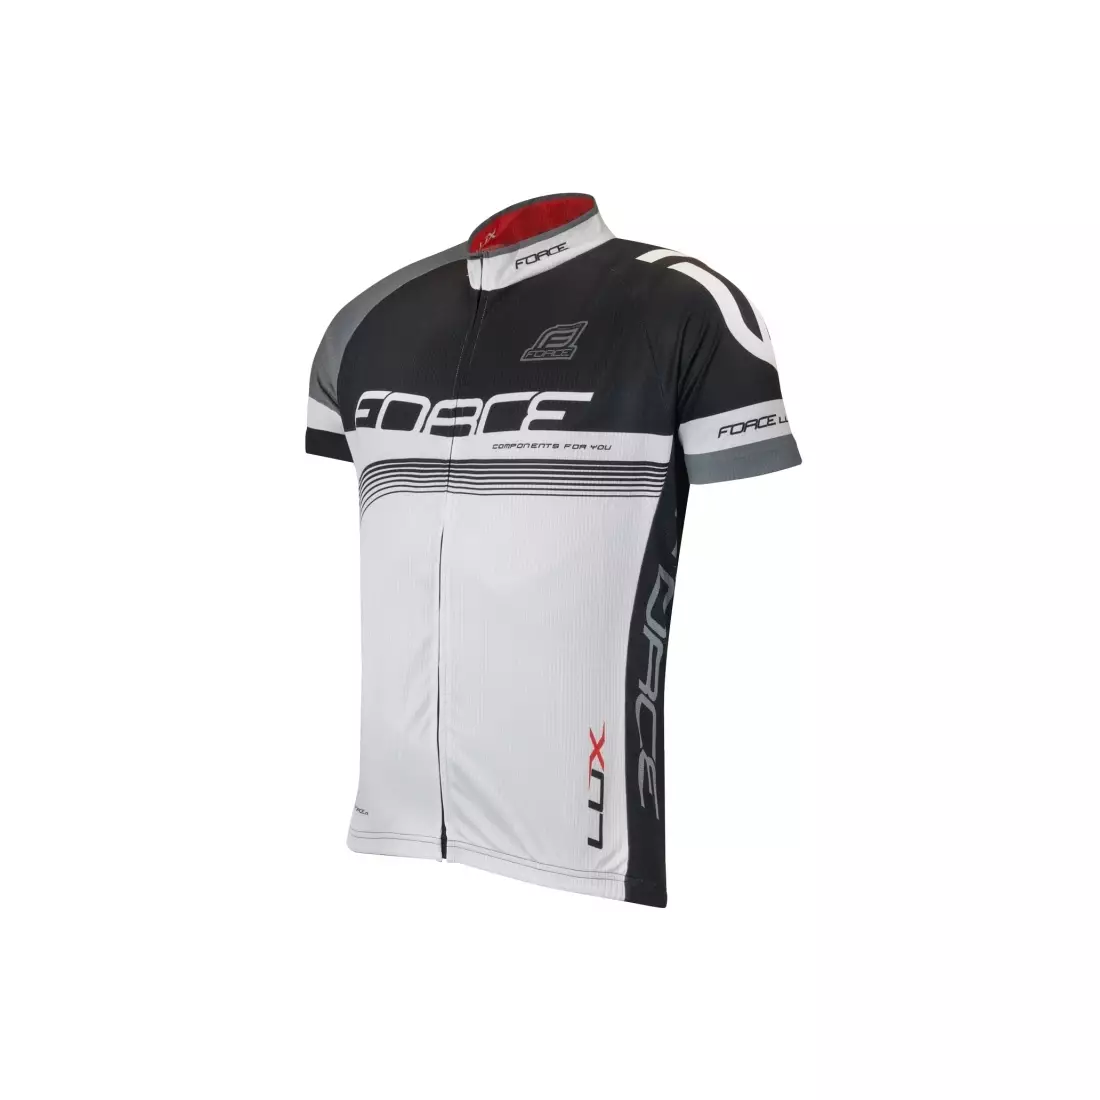 FORCE LUX men's bicycle shirt black and white